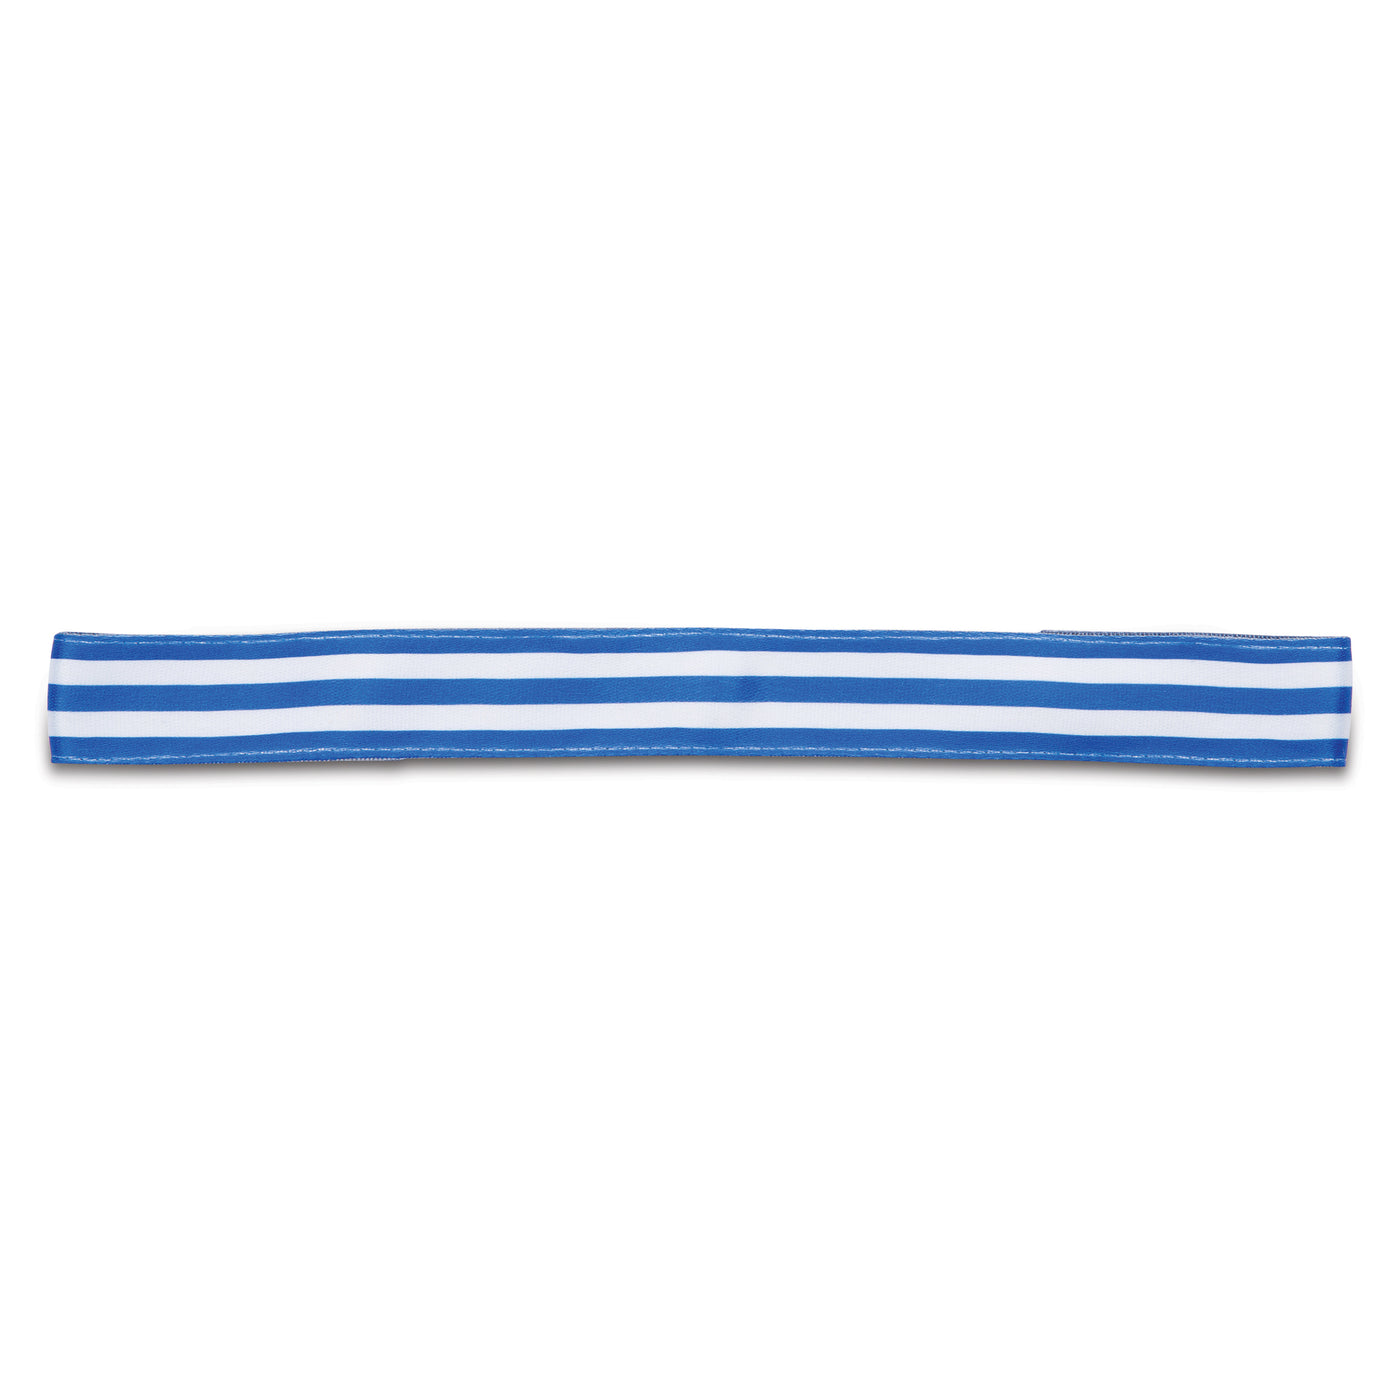 A blue and white striped headband with a black elastic band.